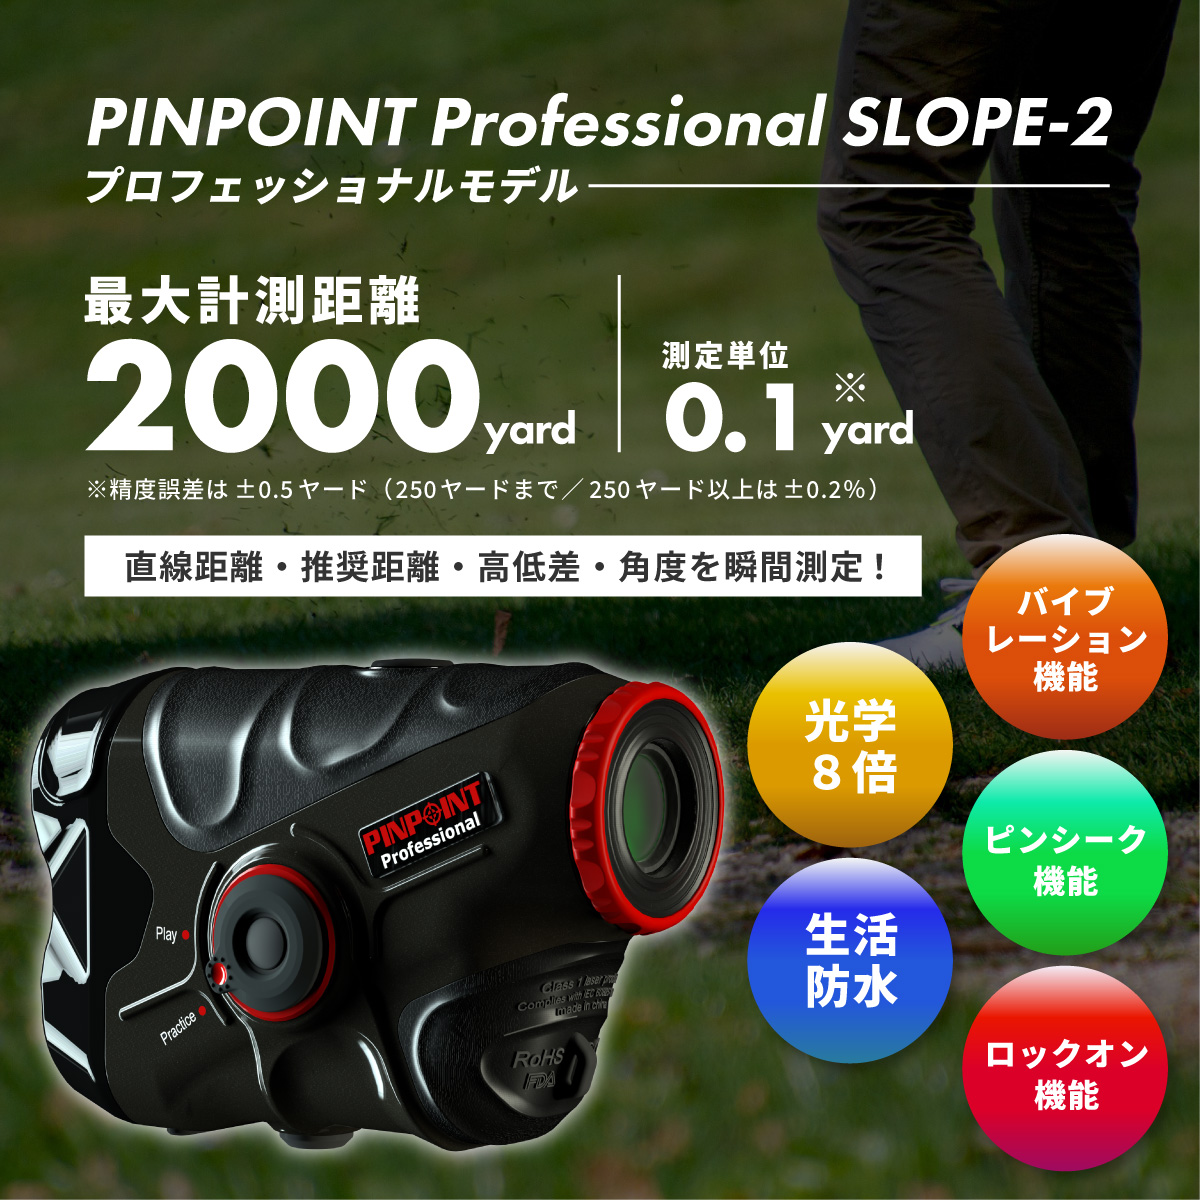 PINPOINT SLOPE-2 商品情報